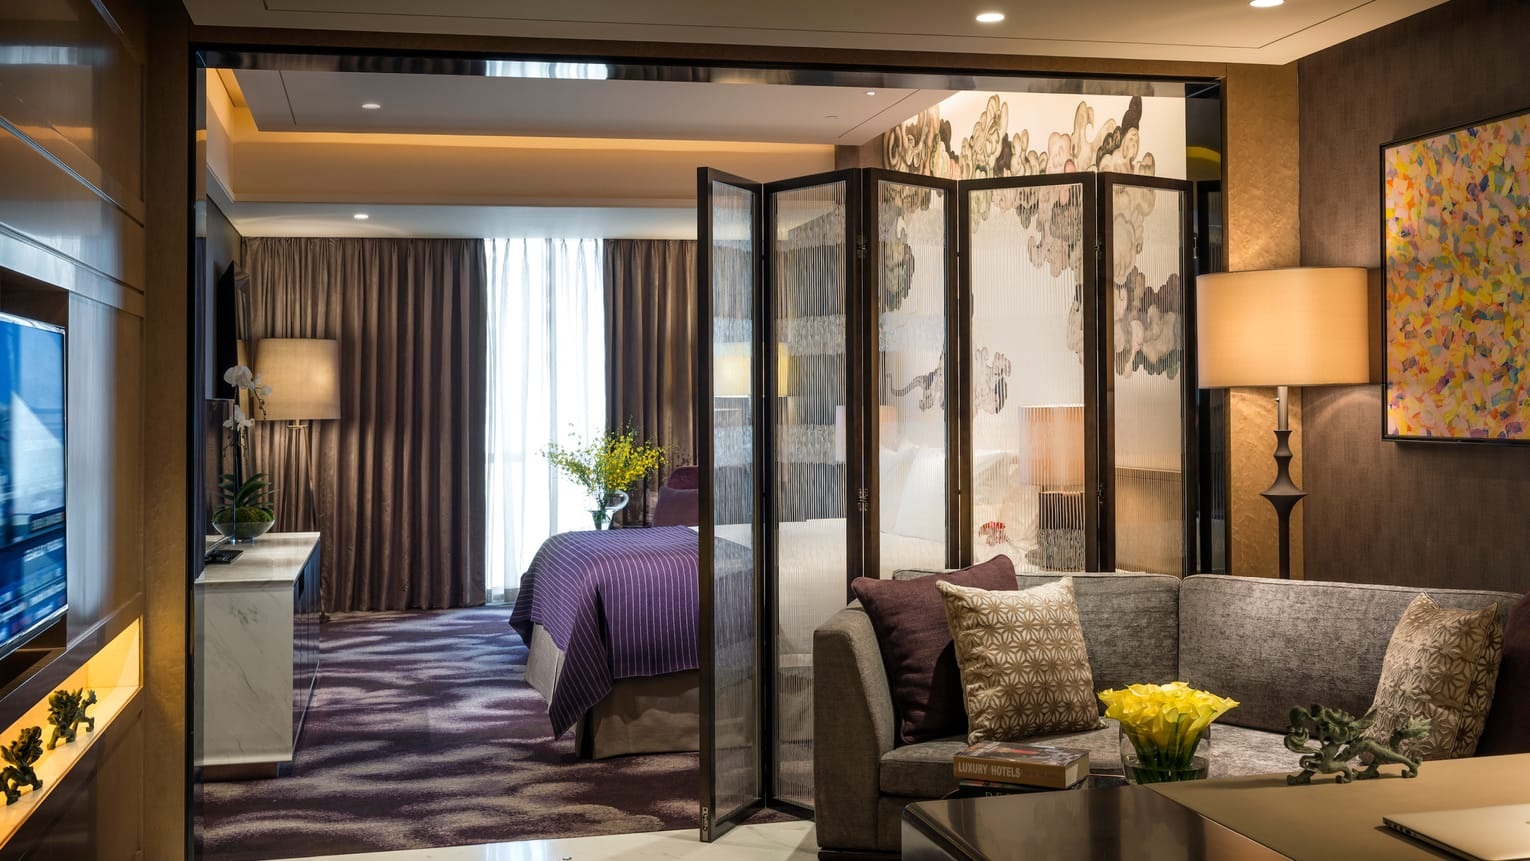 Luxurious room at the Four Seasons Hotel Shenzhen. Click to enlarge.